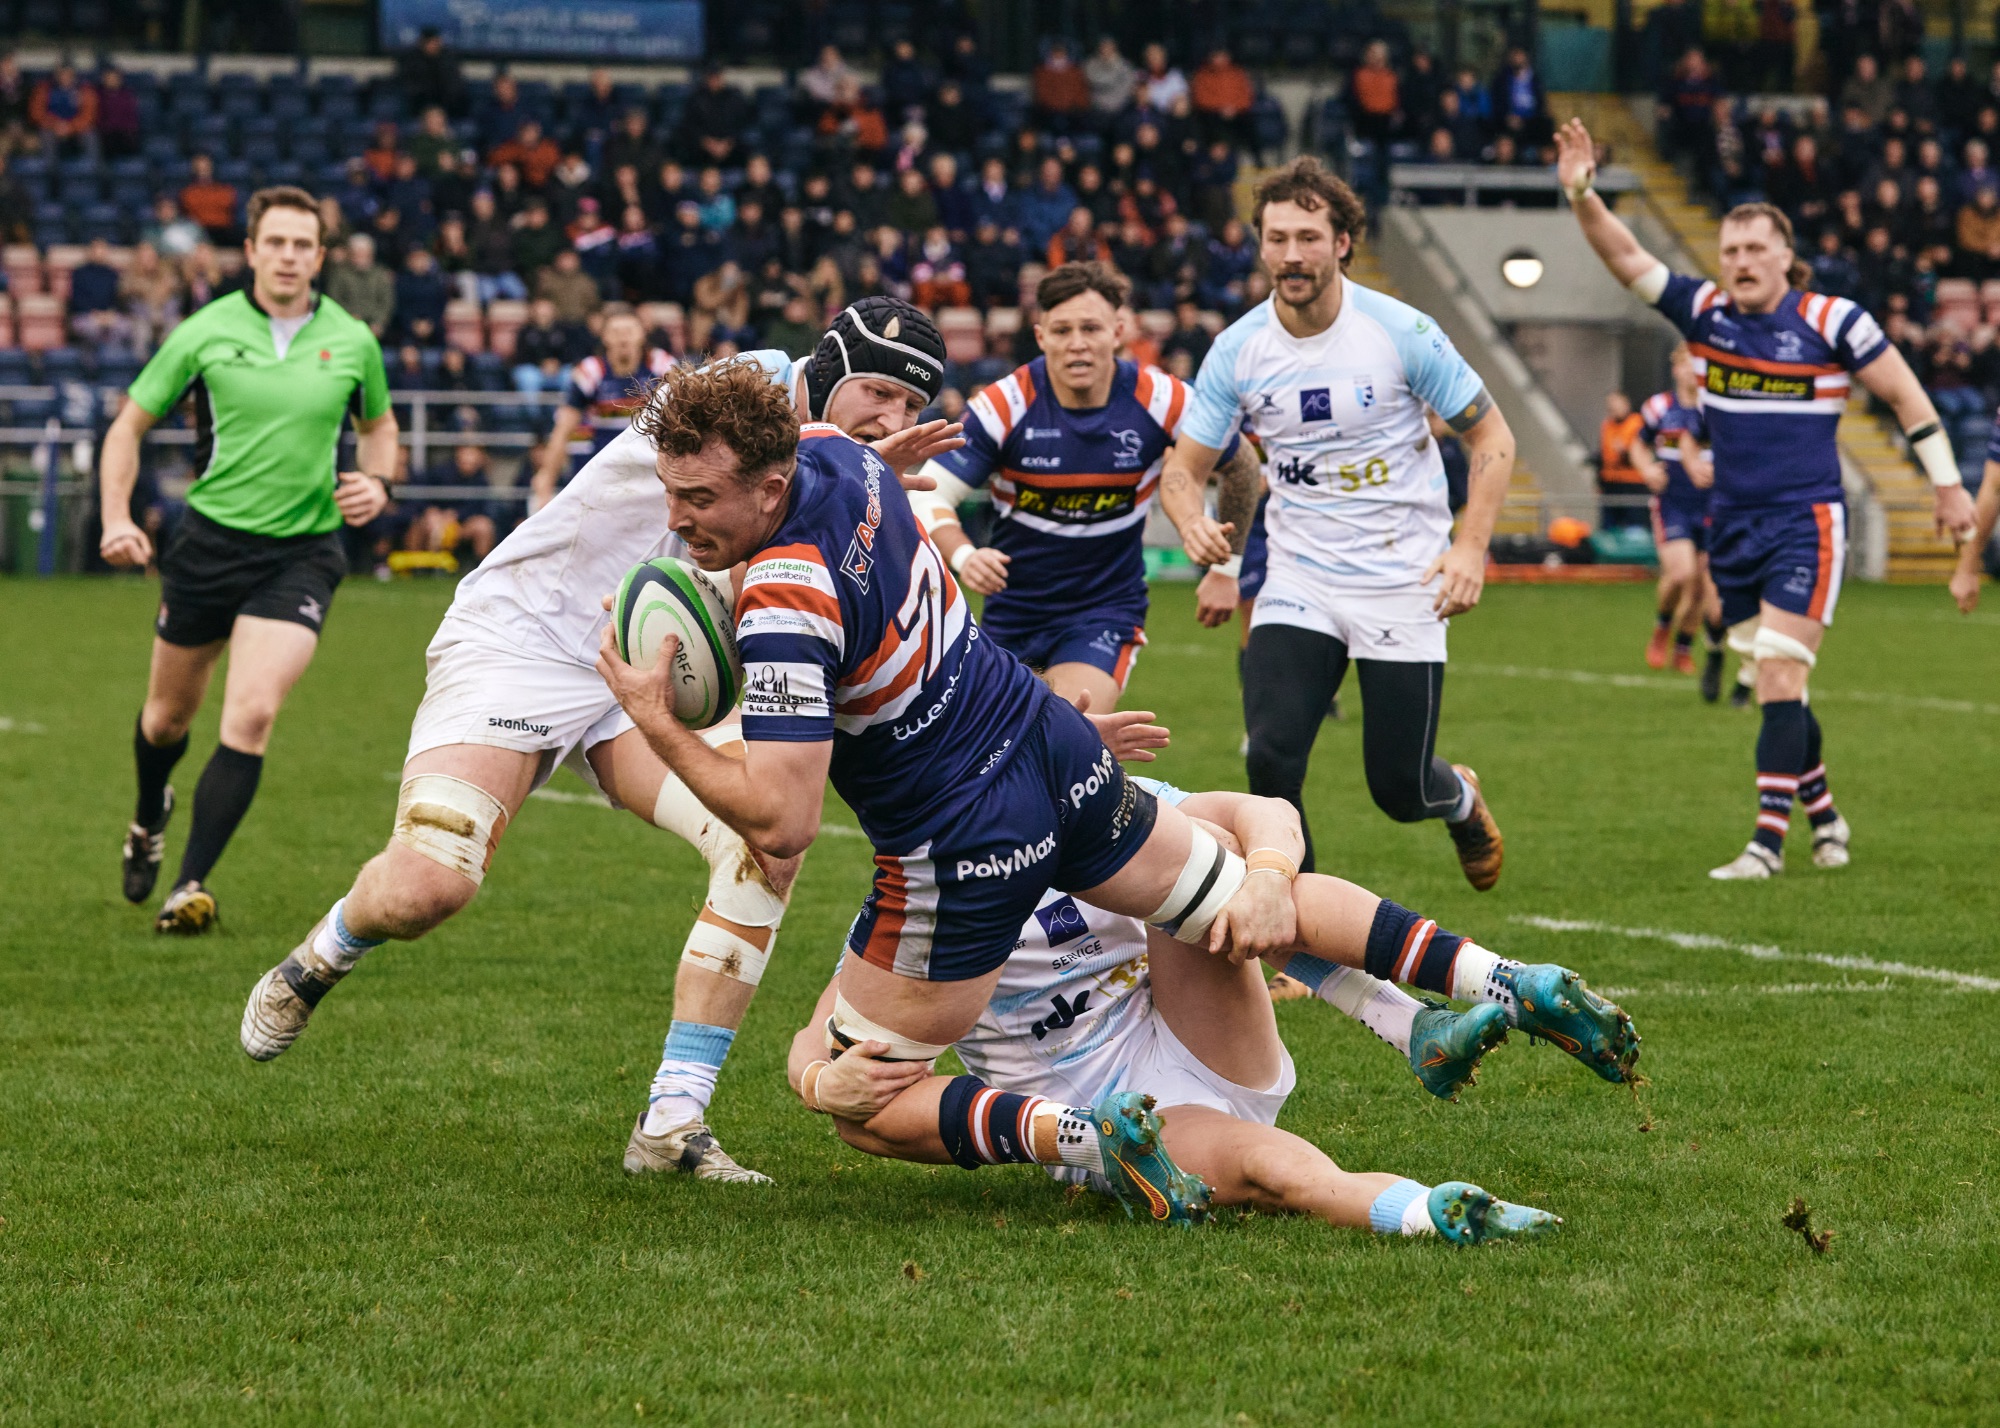 OLI HILLYER-RILEY / RUGBY JOURNAL / DONCASTER KNIGHTS